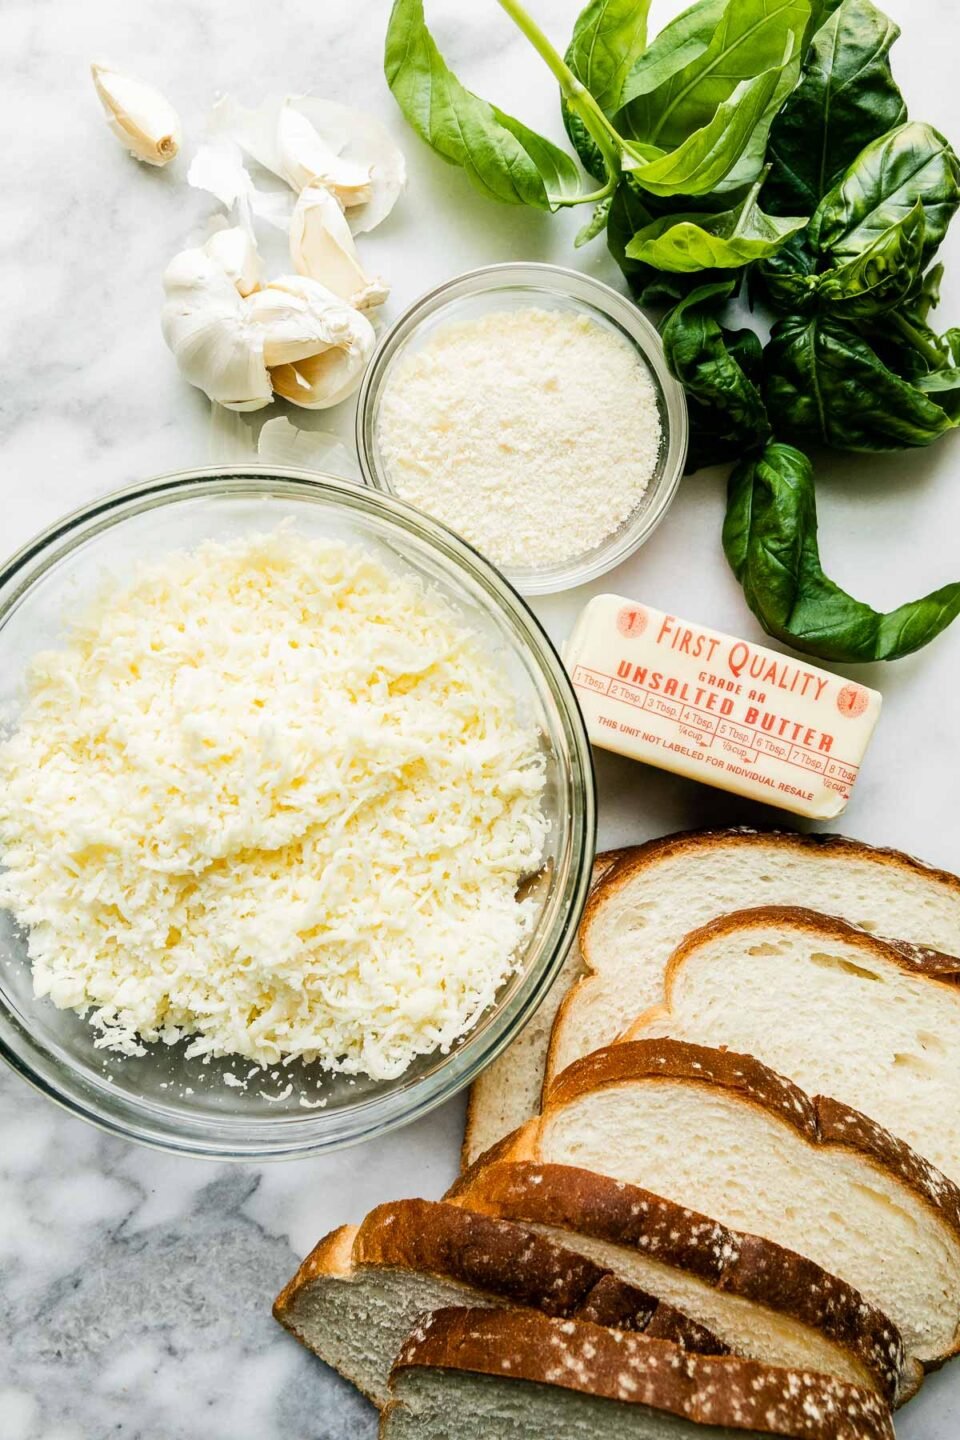 Mozzarella grilled cheese ingredients arranged on a white and gray marble surface: sliced bread choice, unsalted butter, garlic, finely grated parmesan, part-skim mozzarella, and fresh basil.